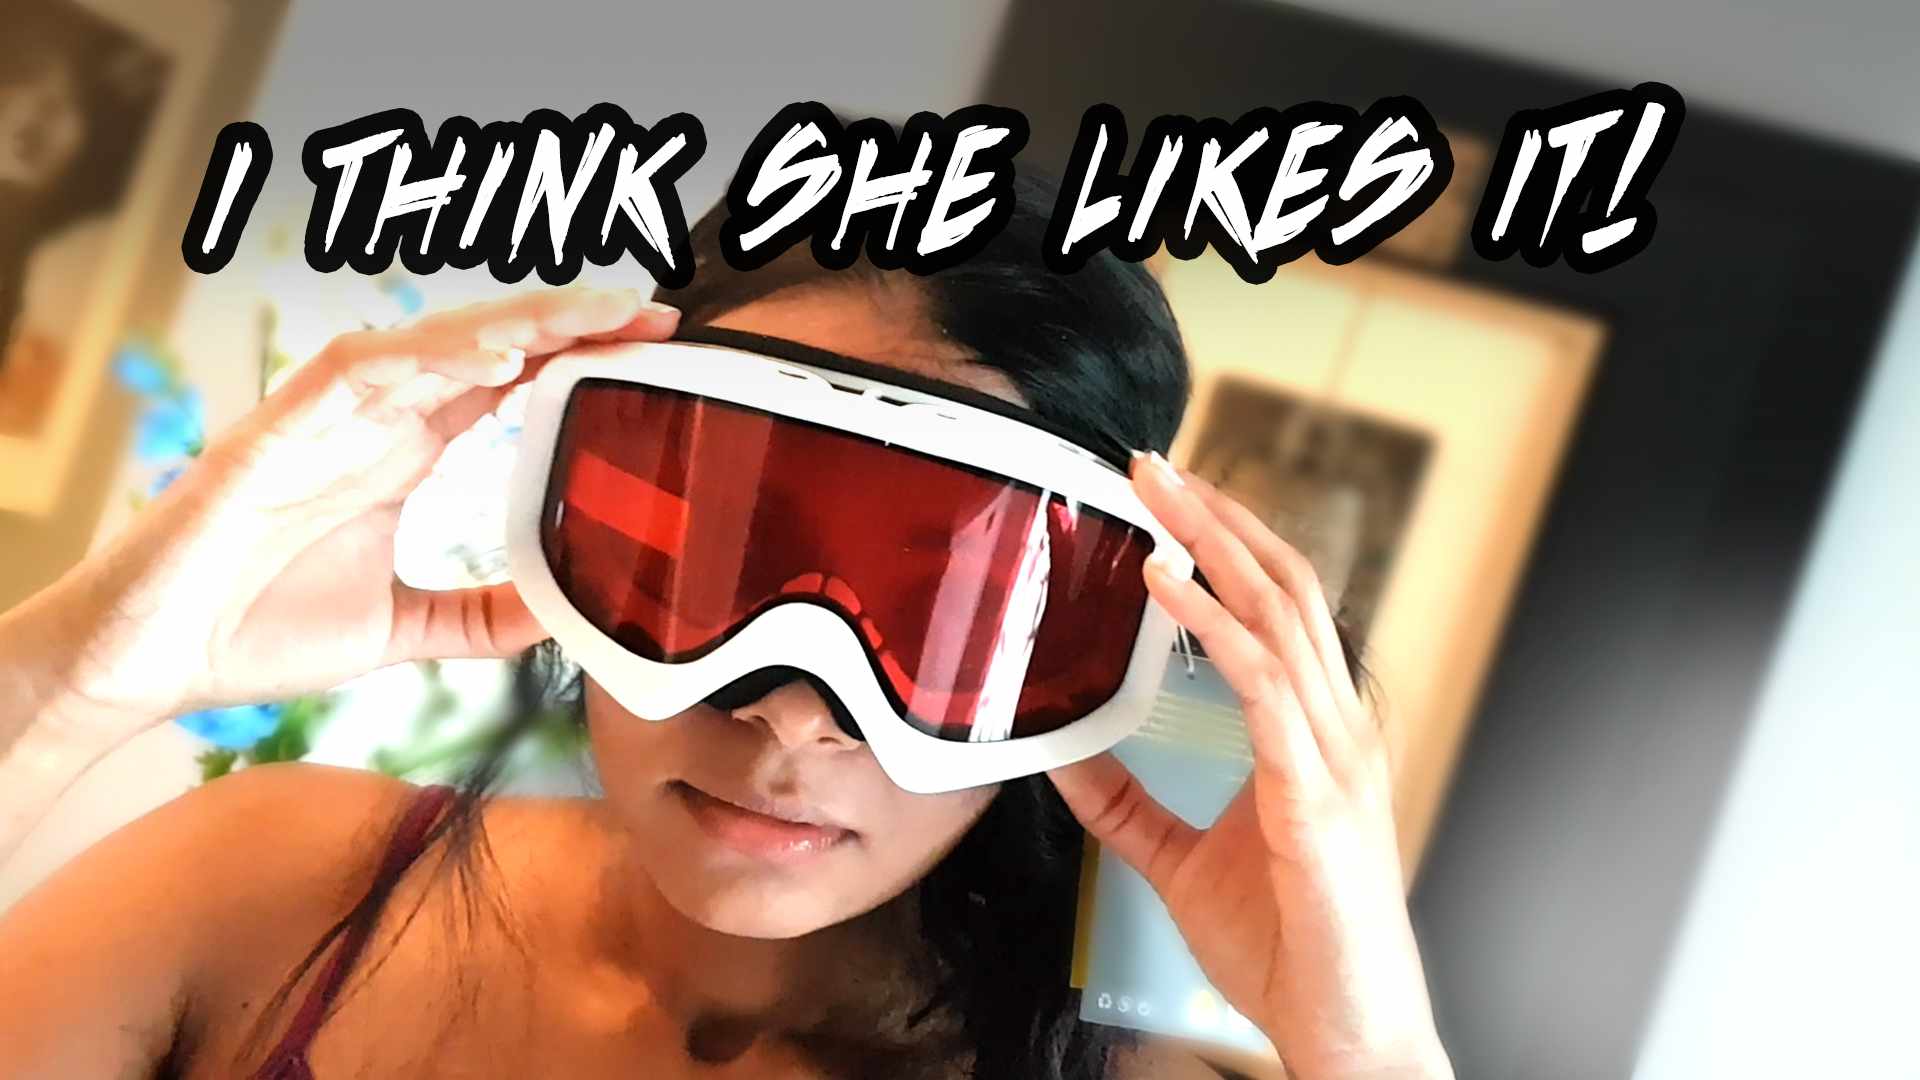 SHE LOVES THEM!!.. But are they for Amateurs or a Pro? Unigear X1 UV Anti-fog Snowboard Goggles